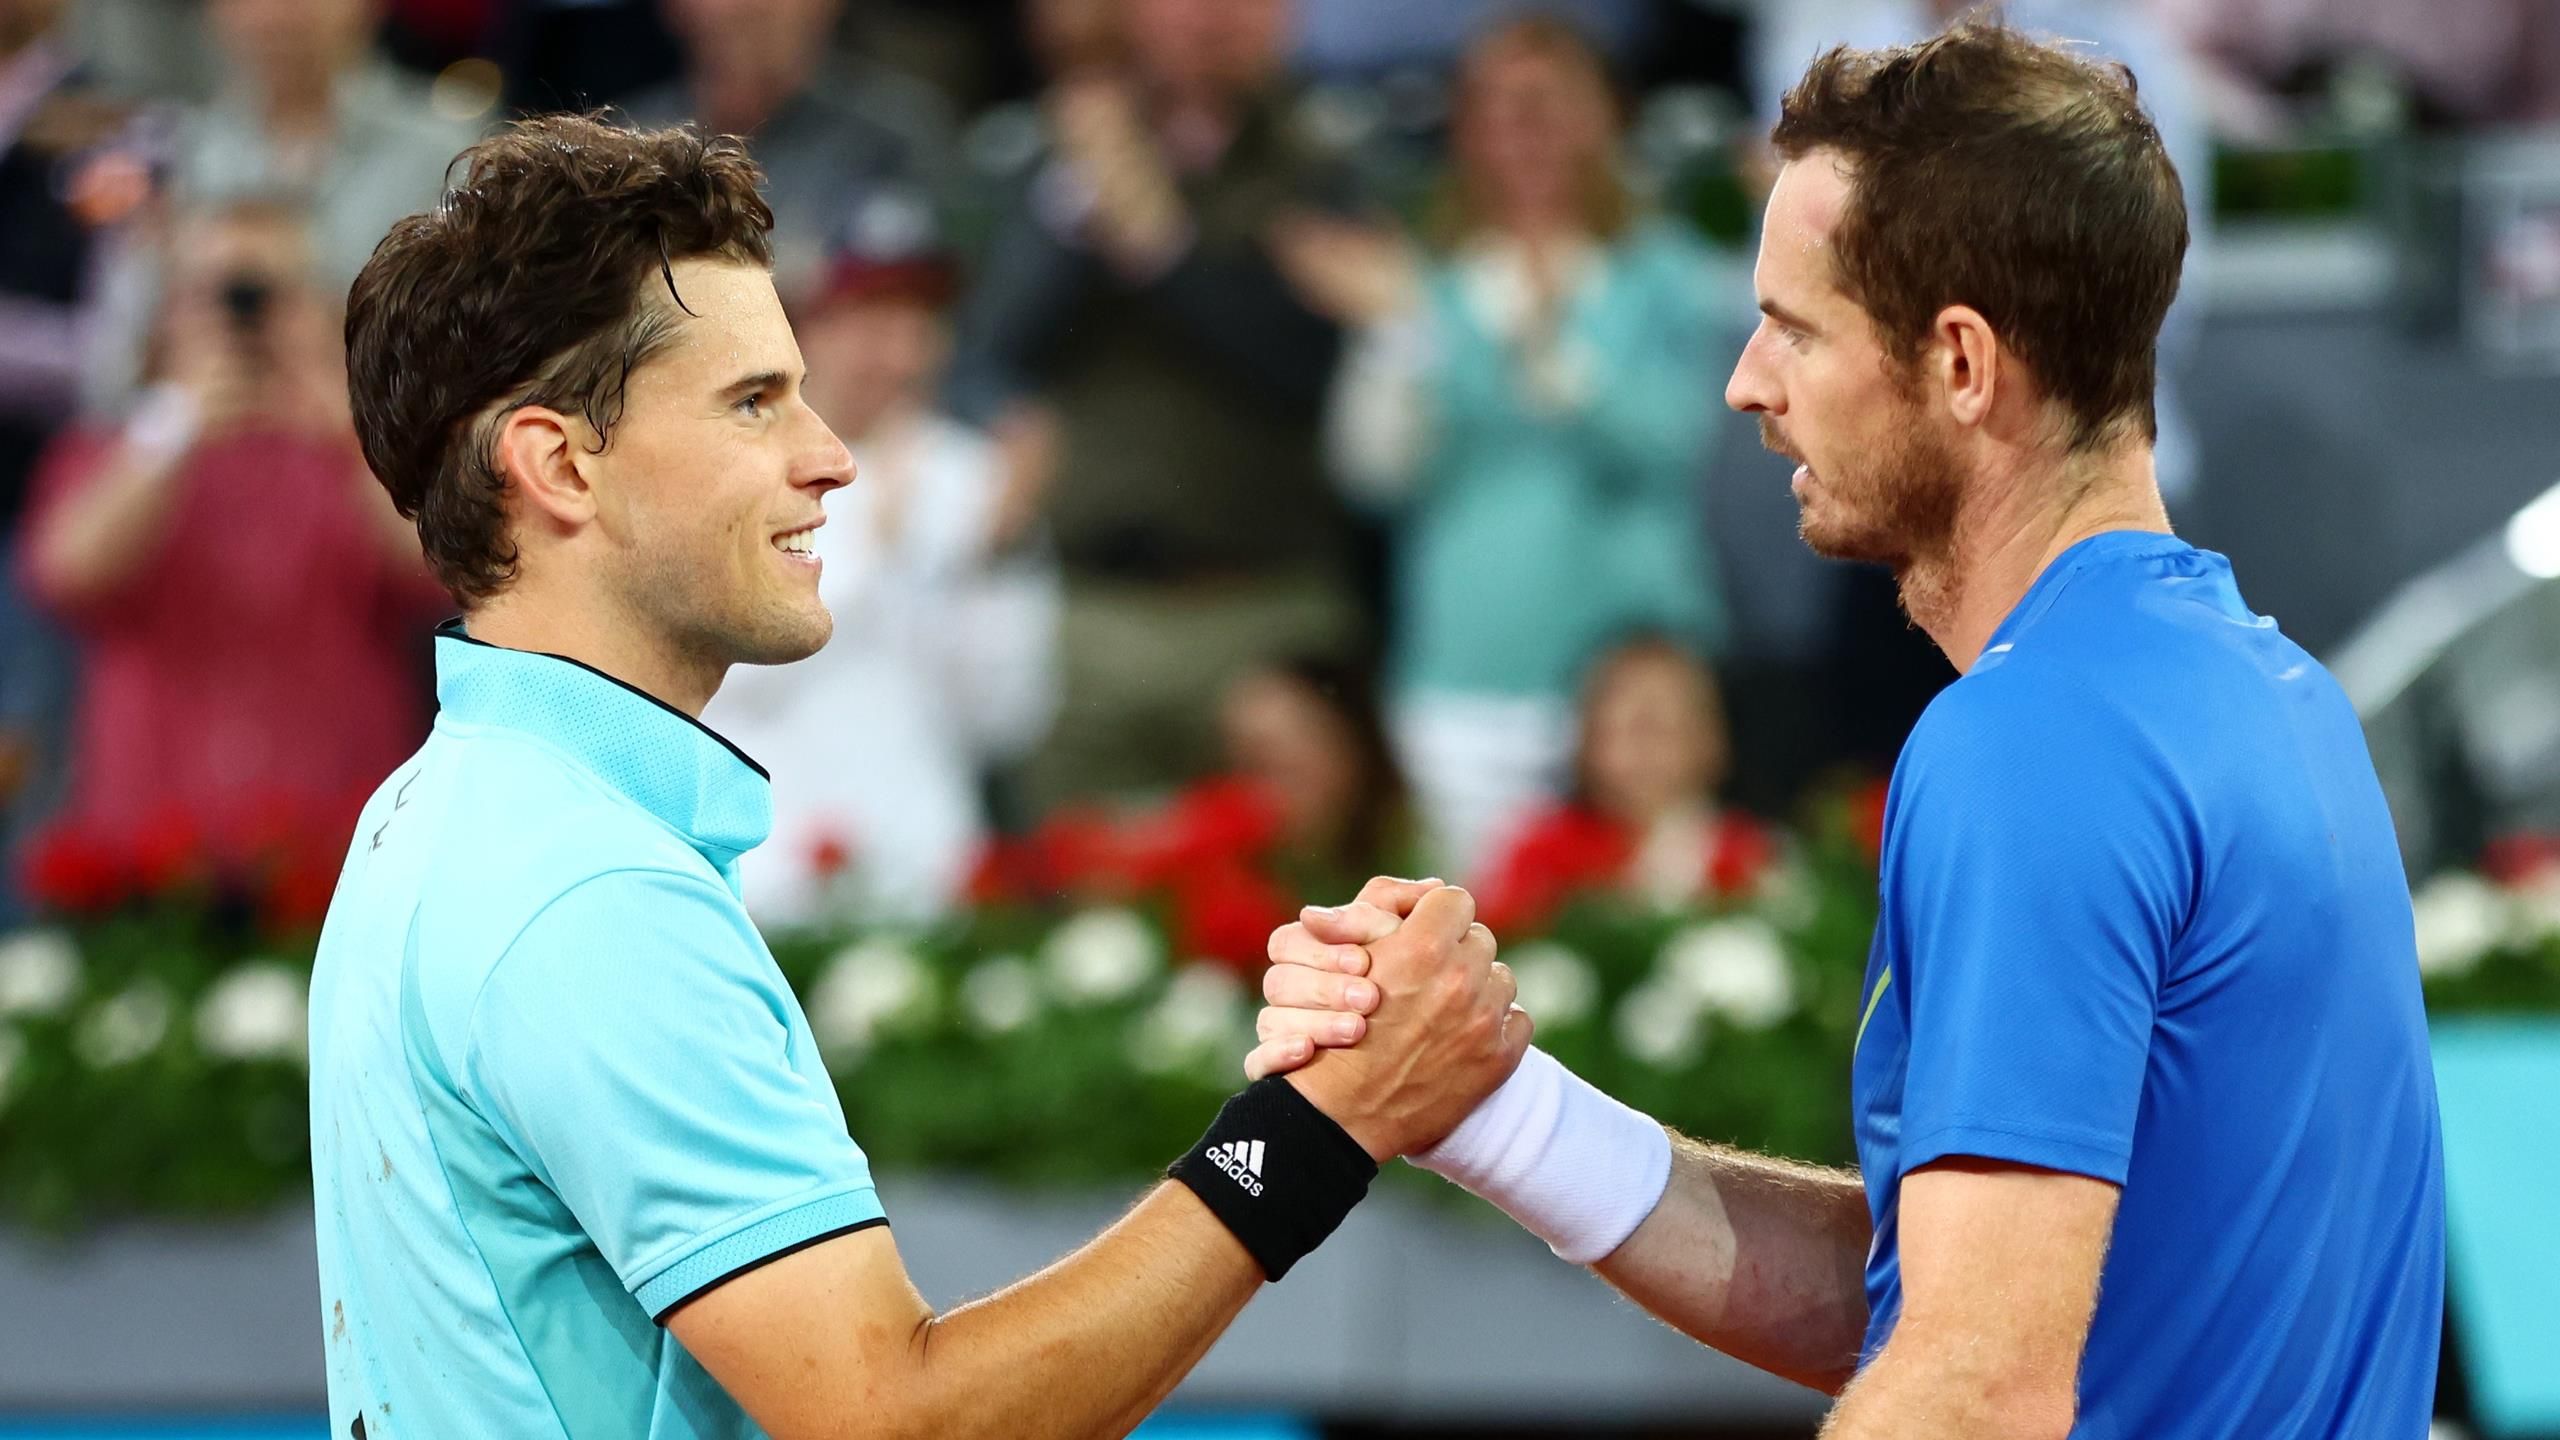 Dominic Thiem says Andy Murray is a role model after gesture at the net following Madrid Open match